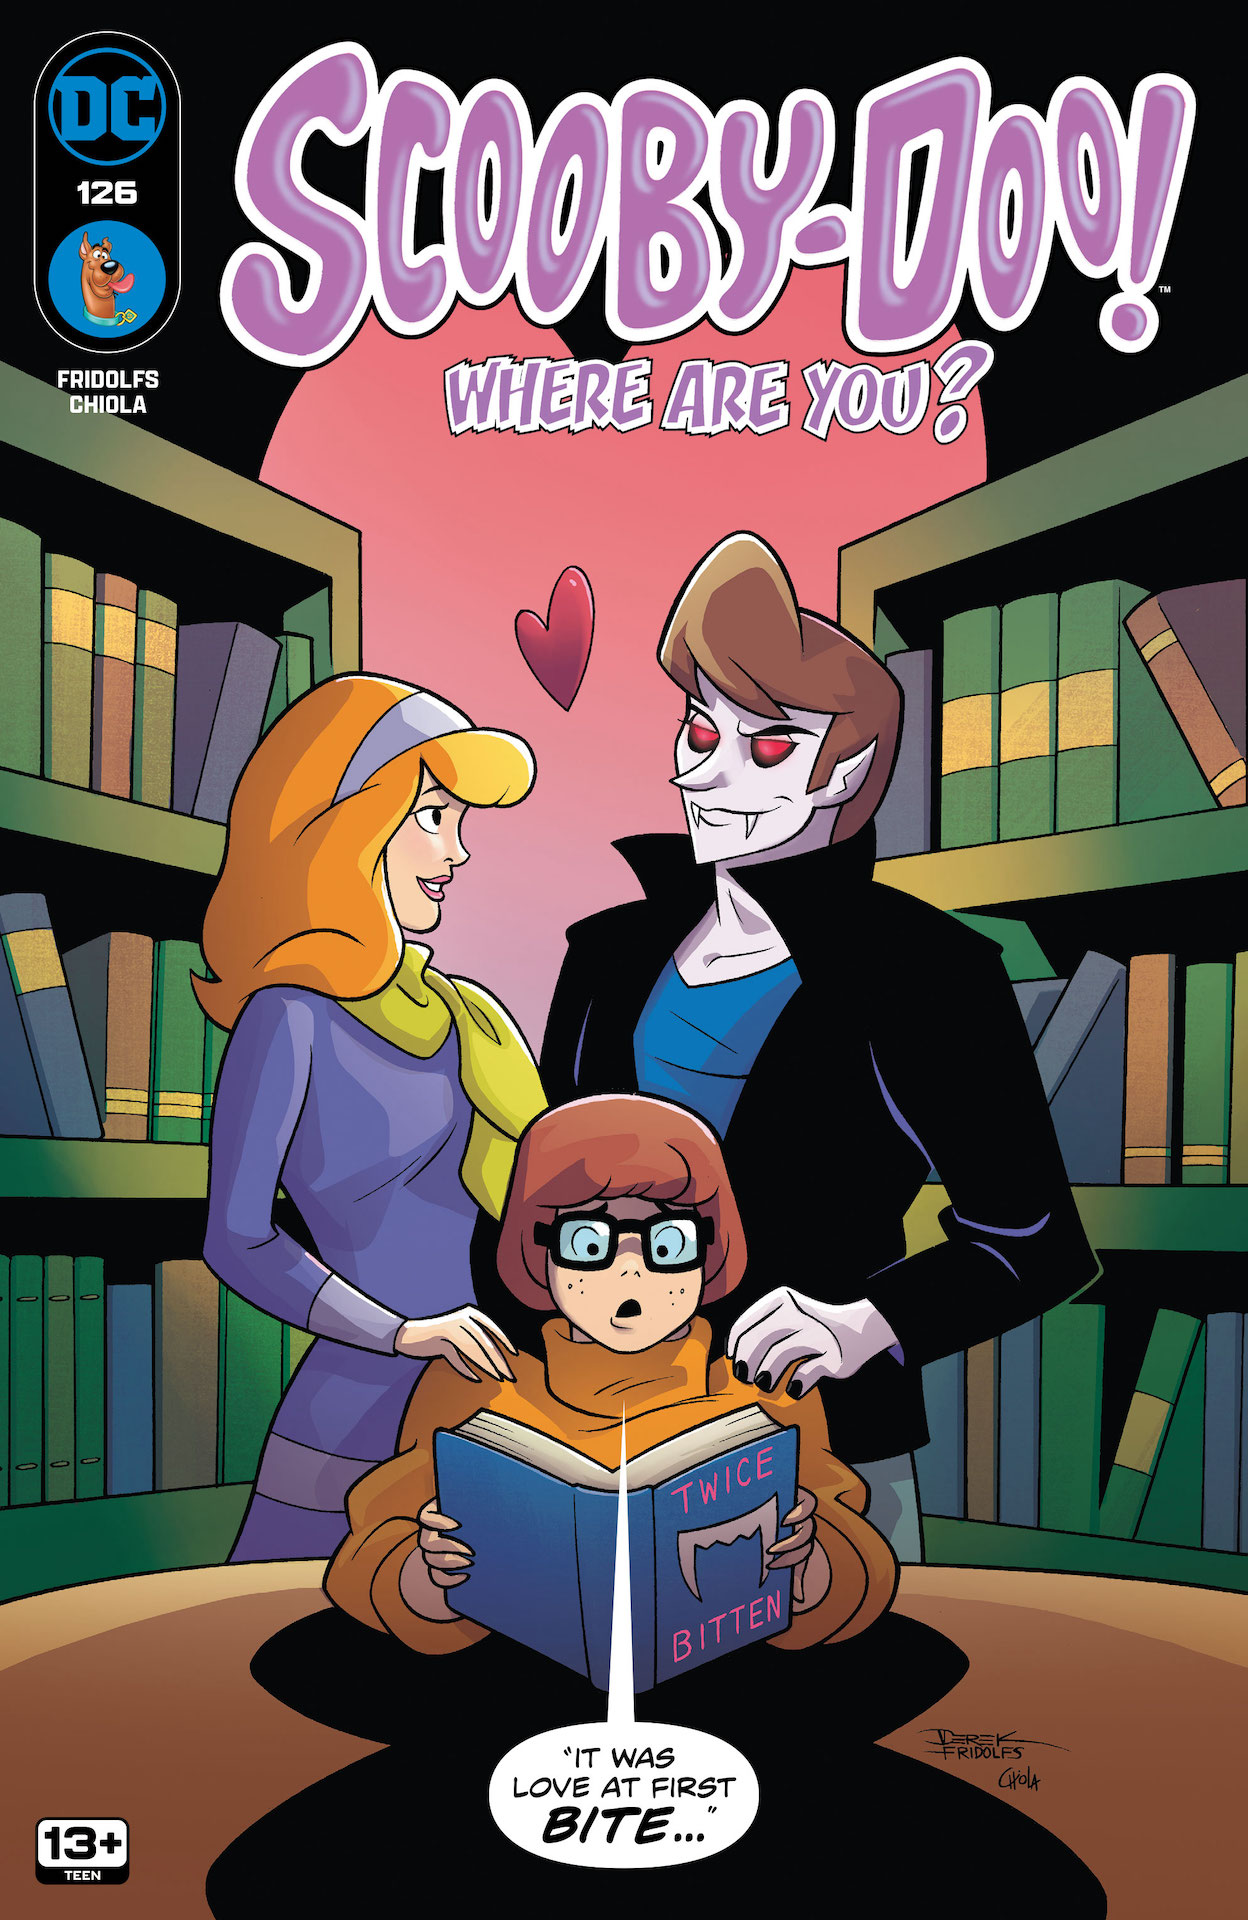 DC Preview: Scooby-Doo, Where Are You? #126